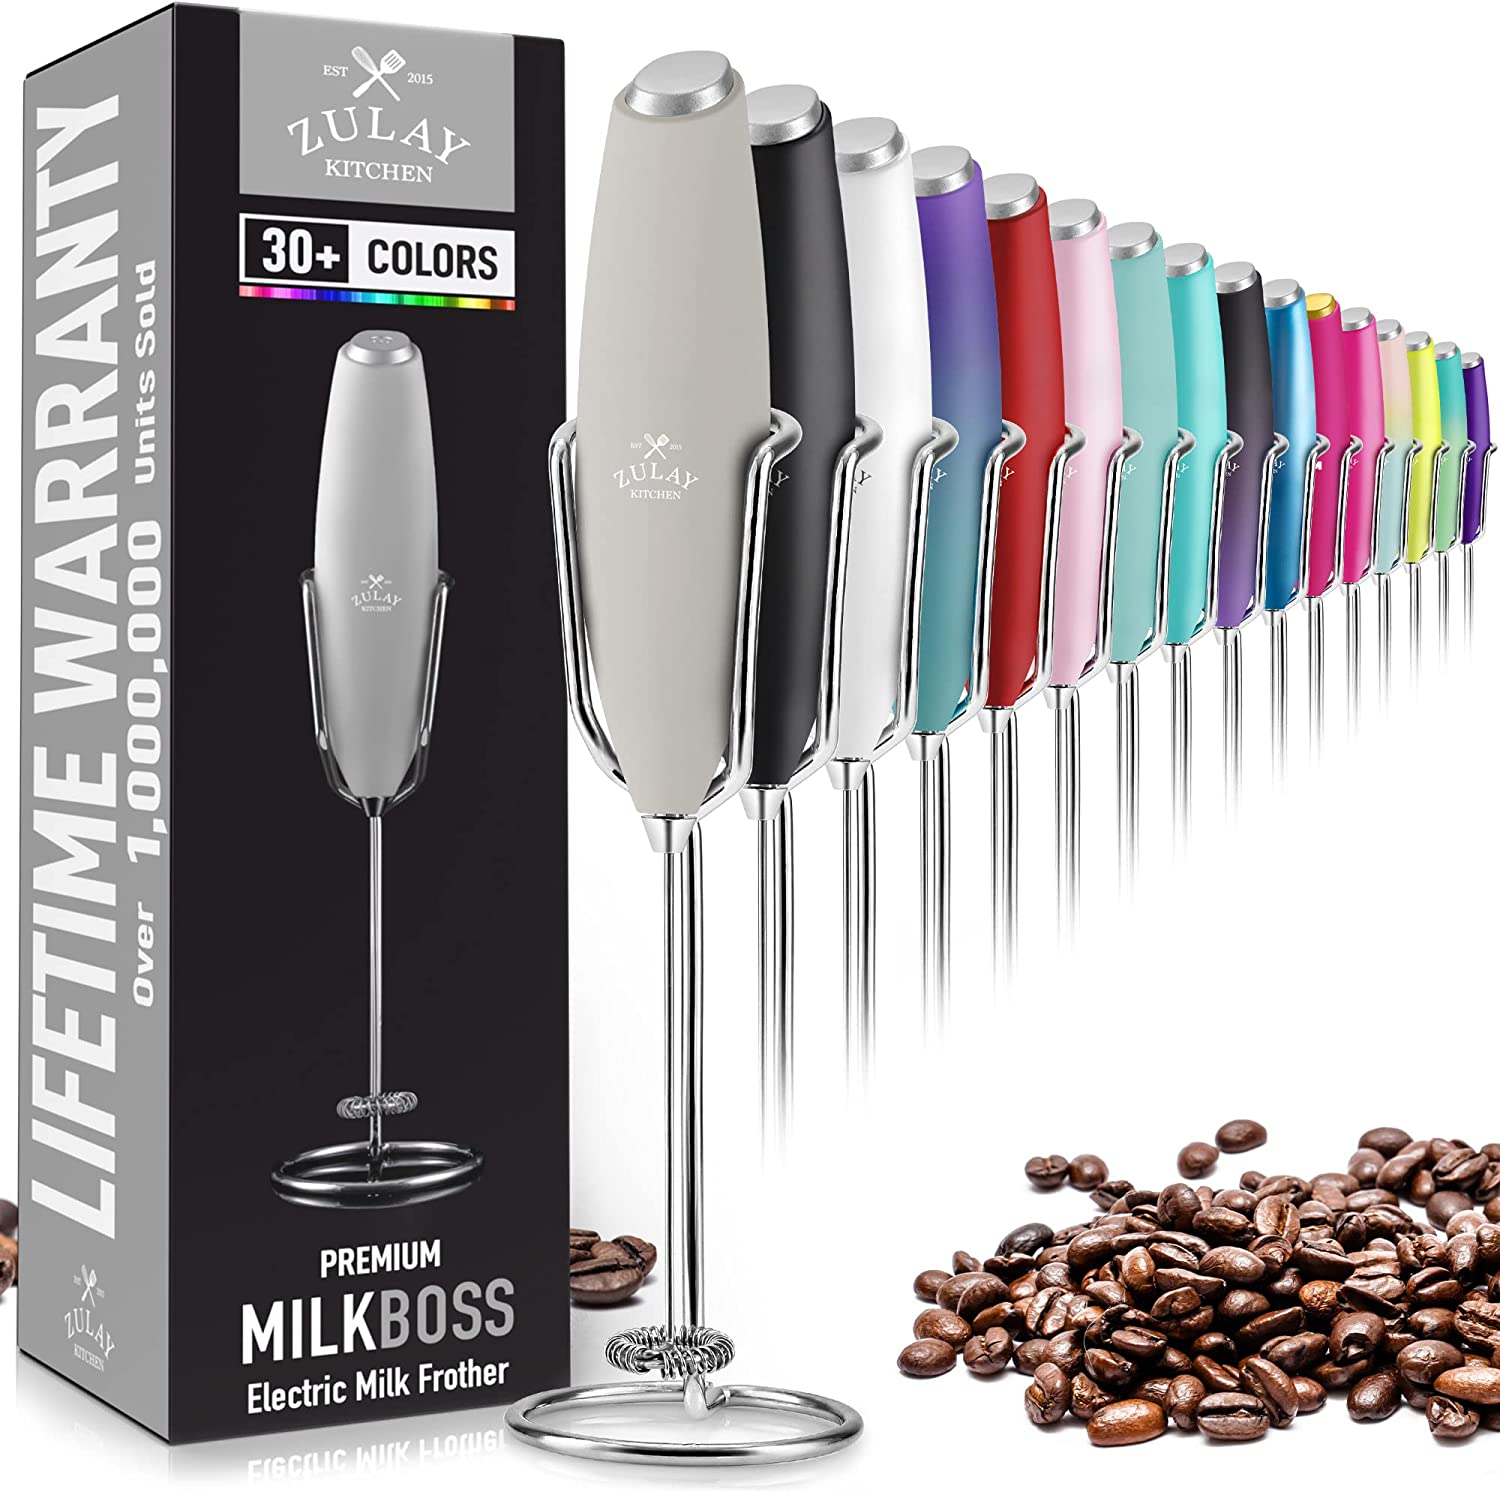 Zulay Executive Series Ultra Premium Gift Milk Frother For Coffee With Improved Stand - Coffee Frother Handheld Foam Maker For Lattes - Electric Milk Frother Handheld For Cappuccino, Frappe, Matcha - Silver